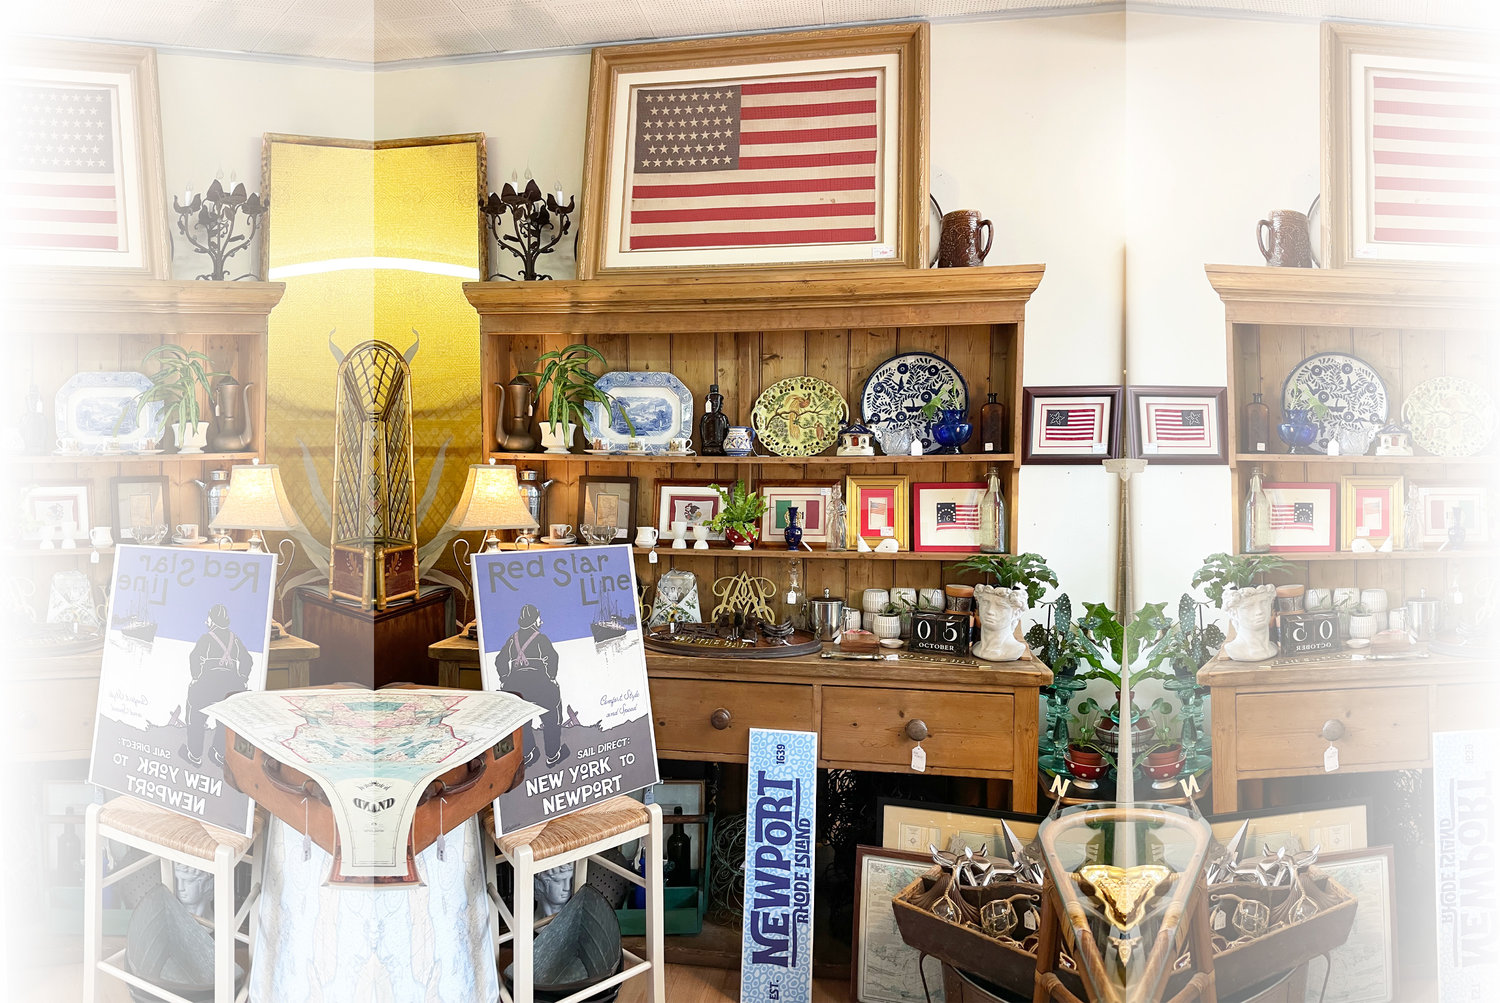 The Leeside Antiques & Gifts